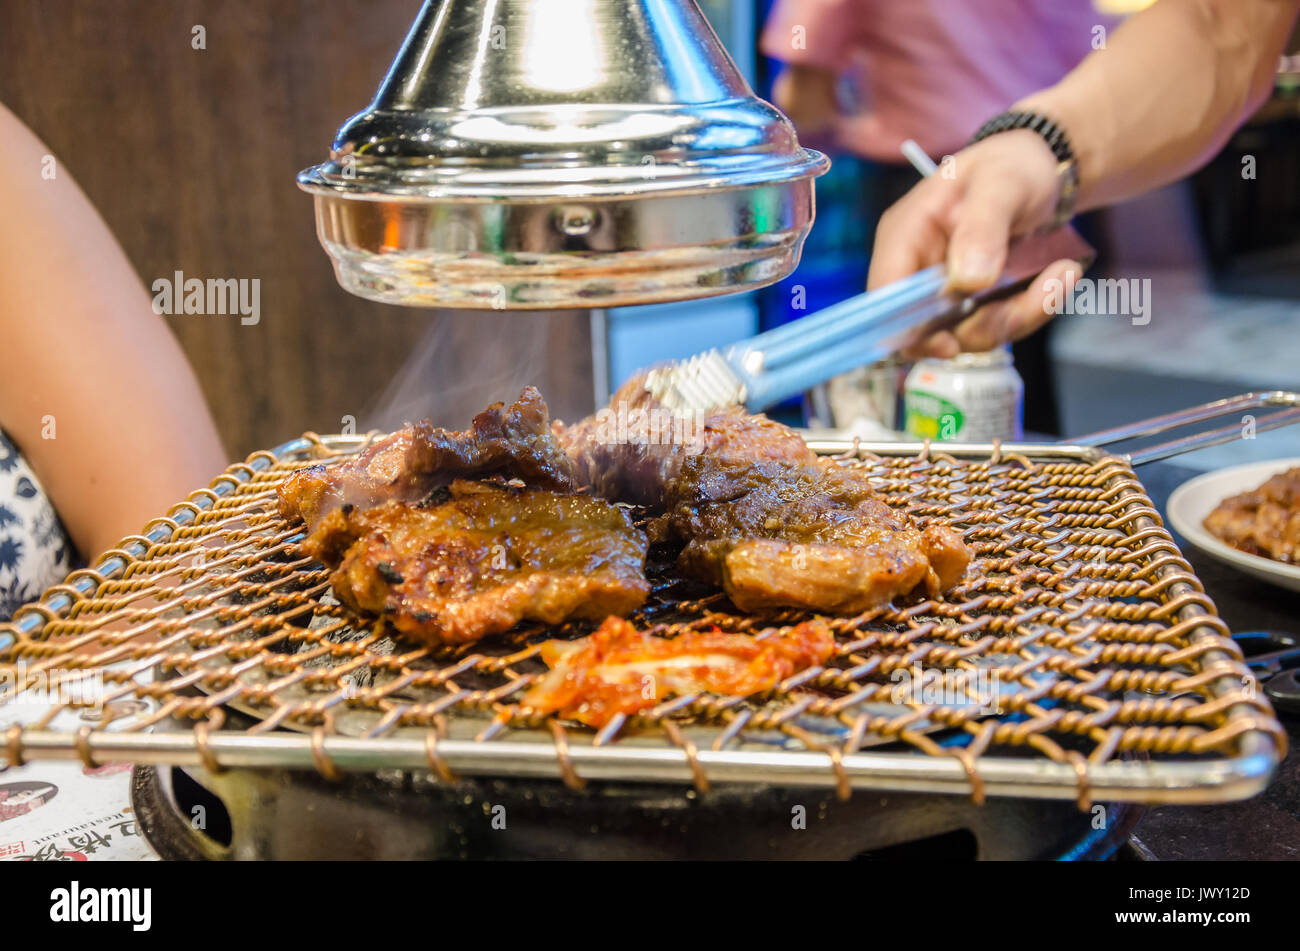 https://c8.alamy.com/comp/JWY12D/meat-cooking-on-a-korean-barbeque-in-a-koream-restaurant-the-meal-JWY12D.jpg